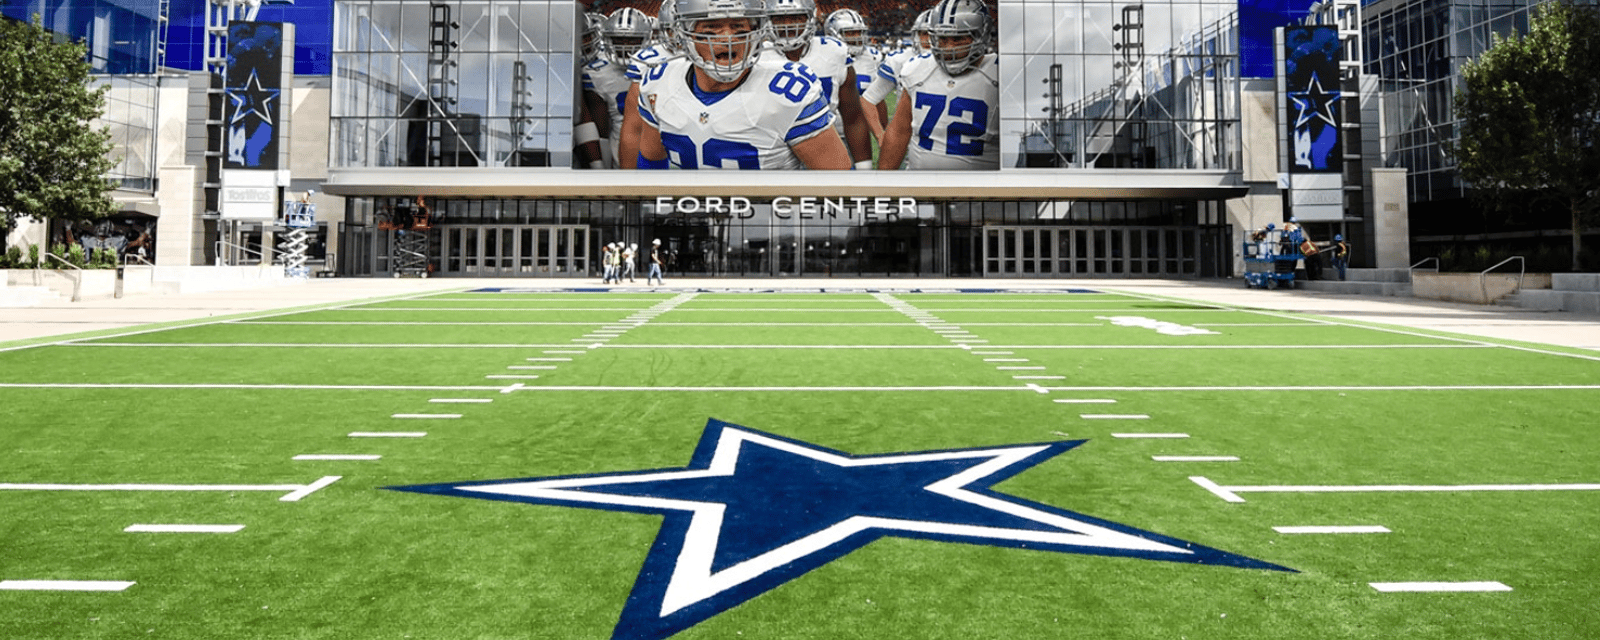 Dallas Cowboys player arrested in South Florida 